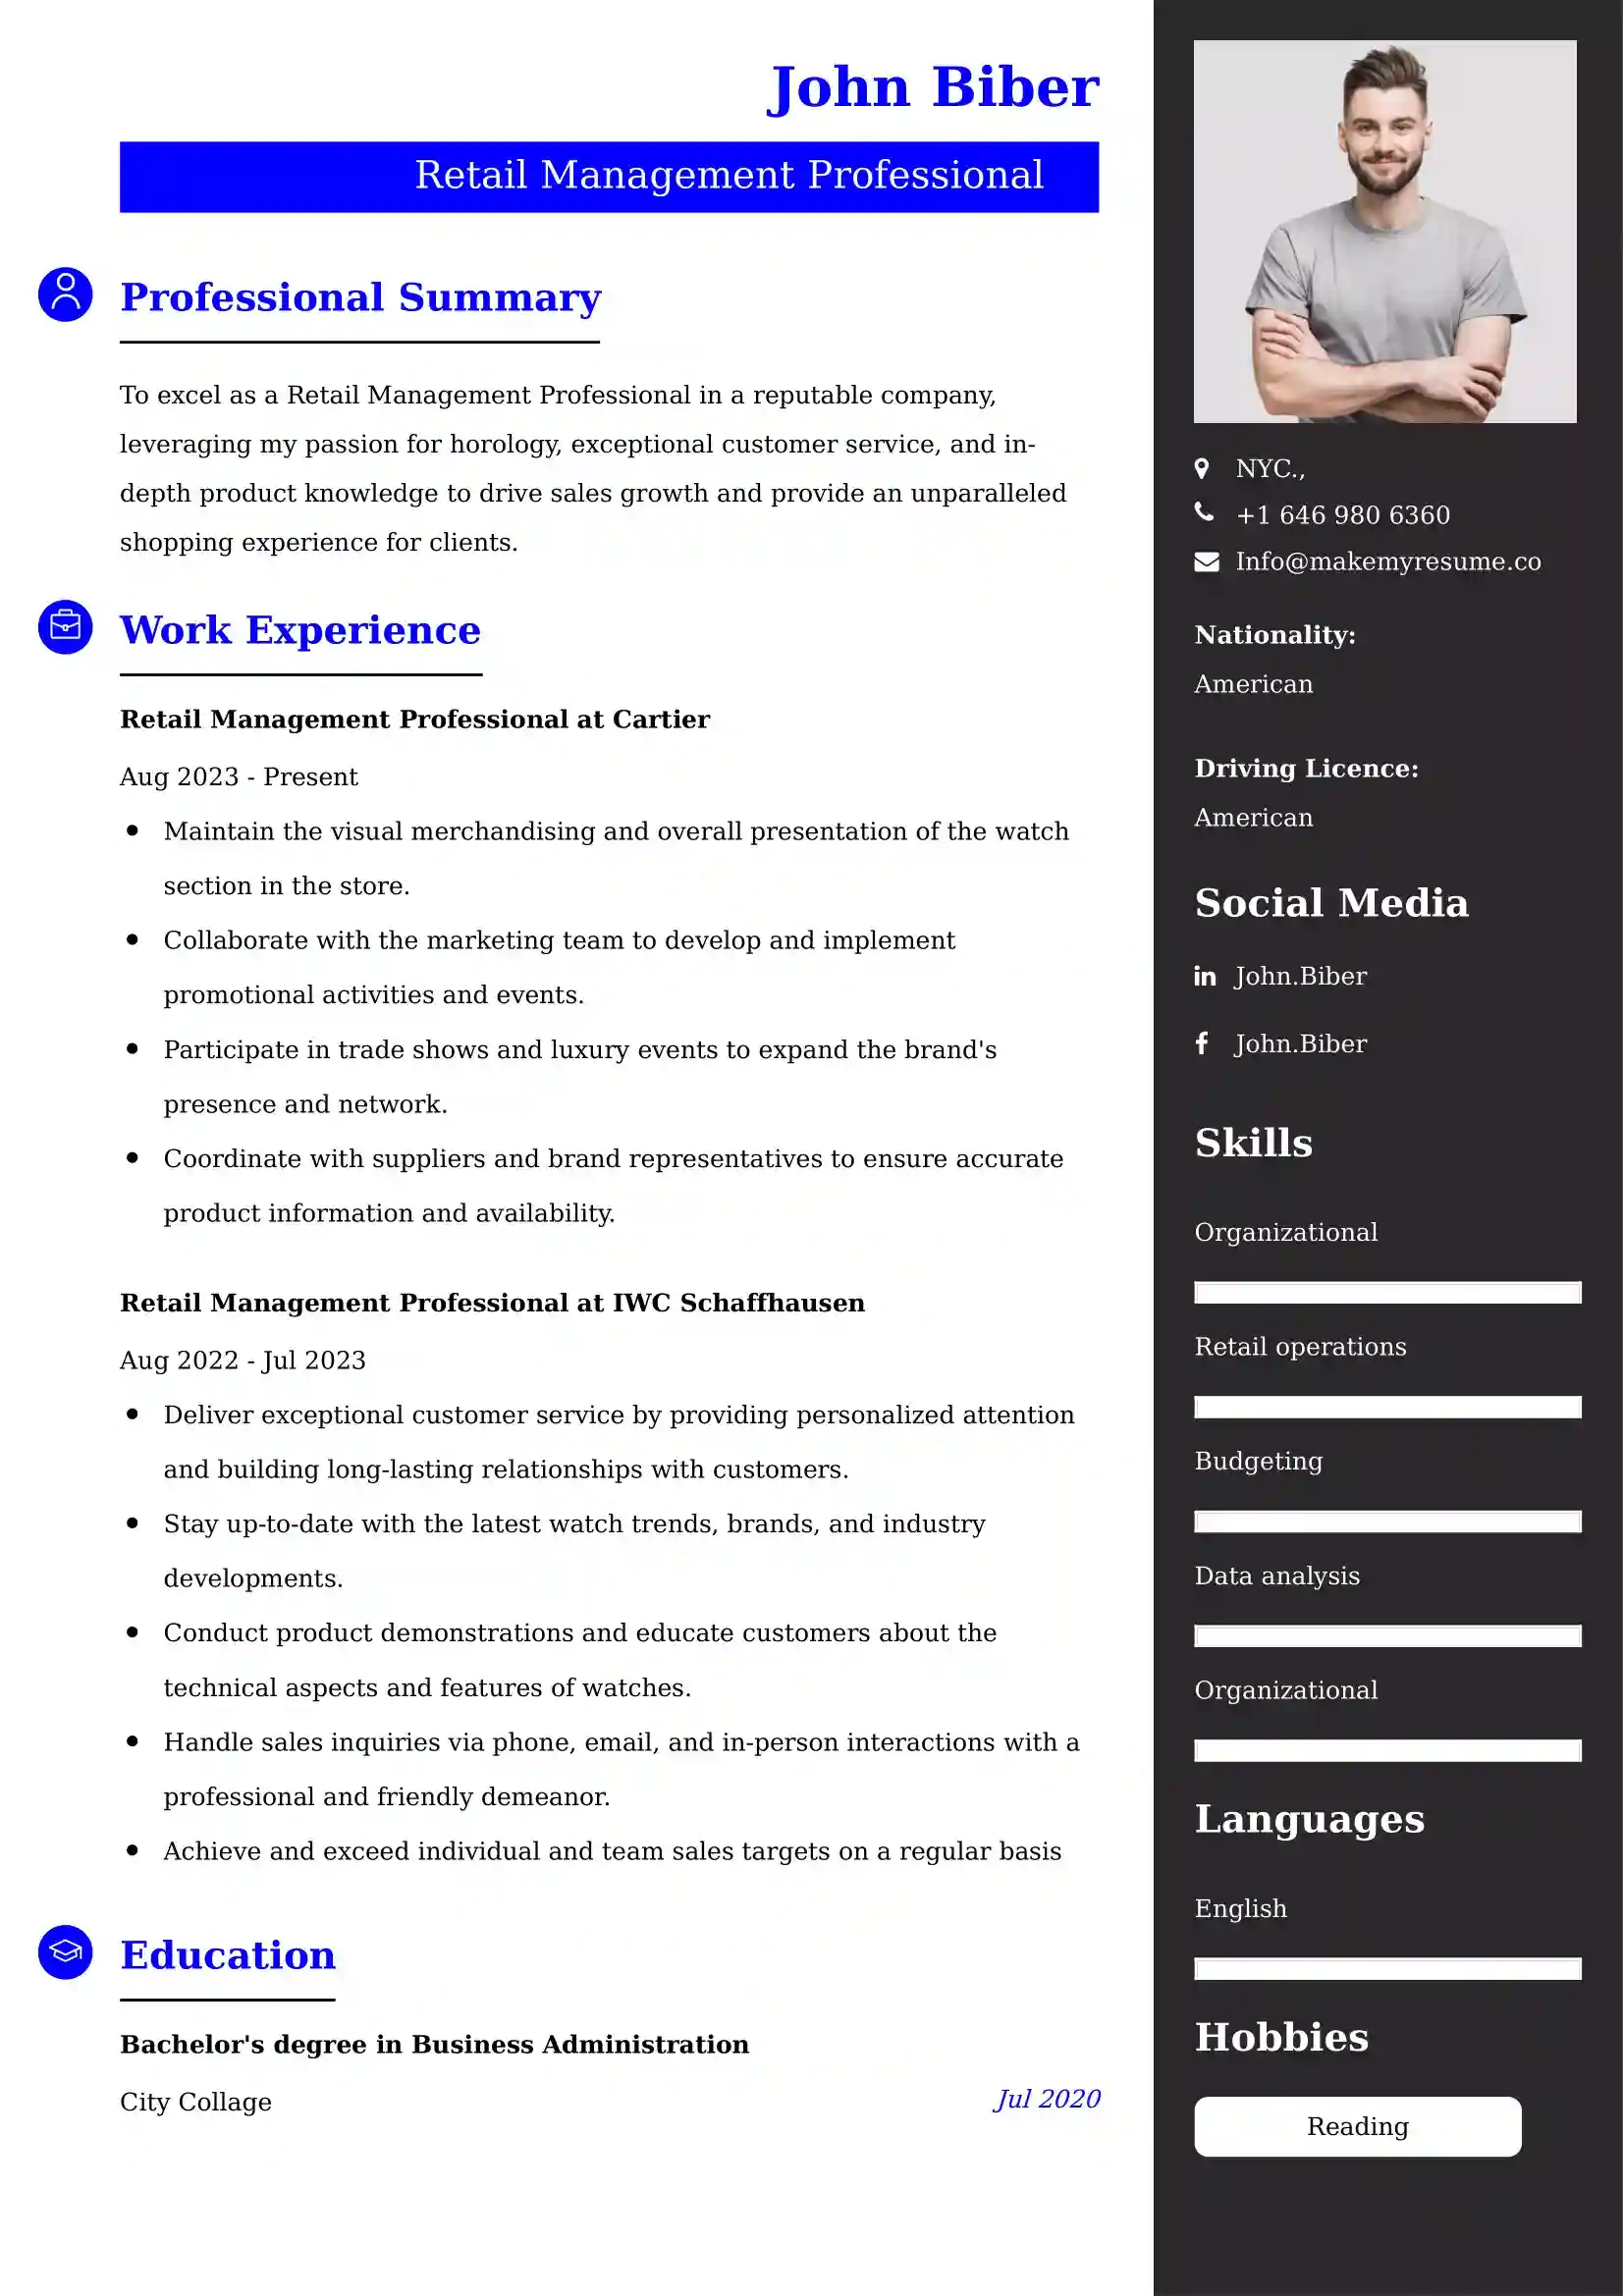 Retail Management Professional Resume Examples - Brazilian Format, Latest Template